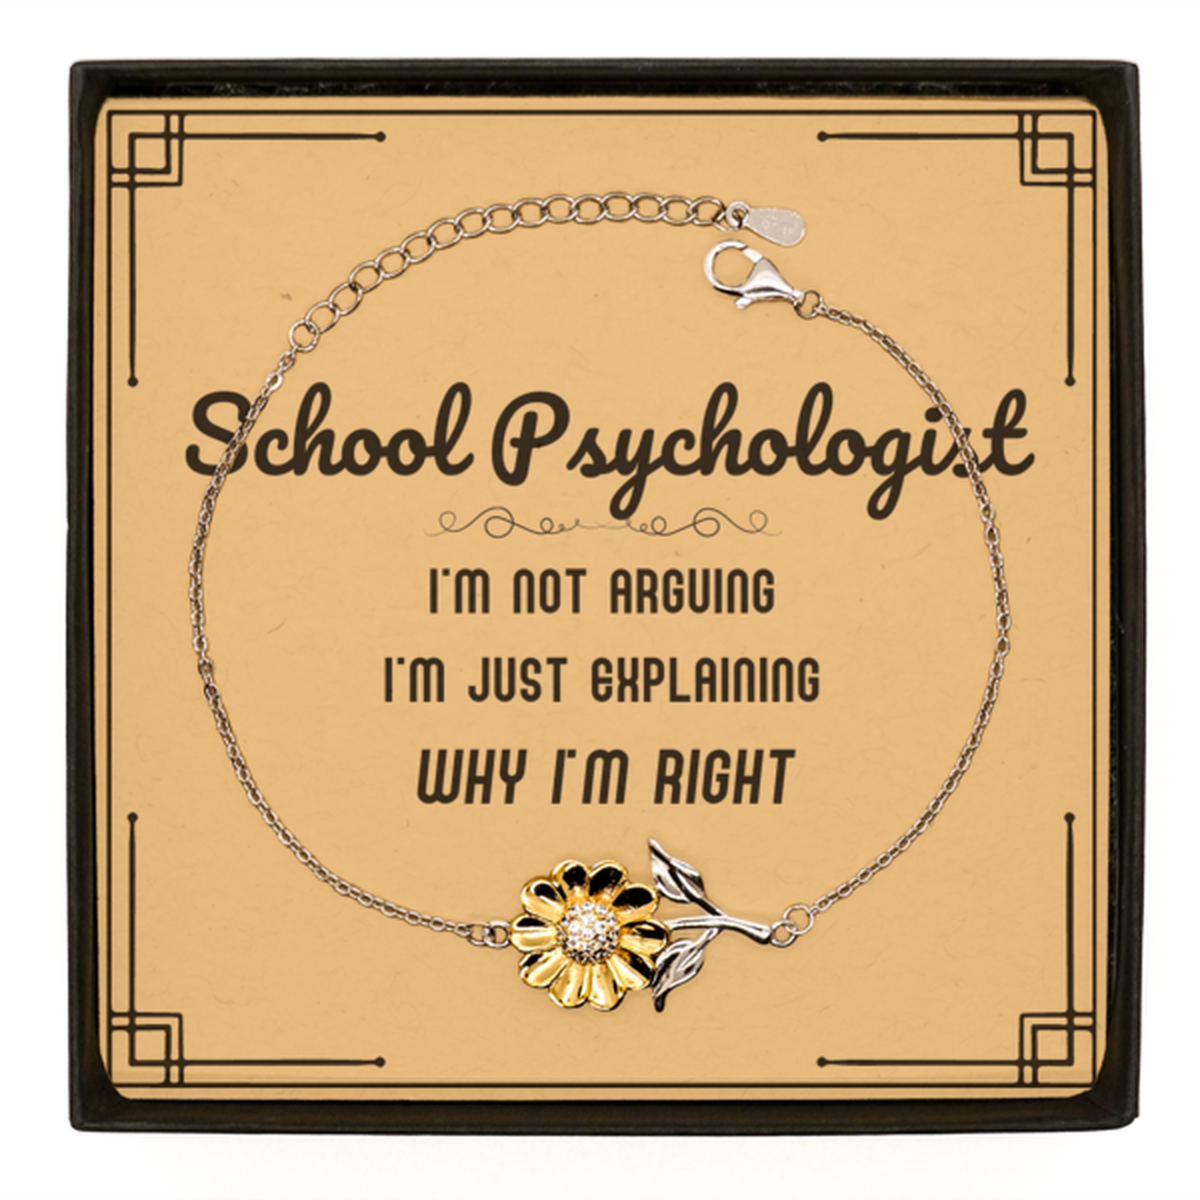 School Psychologist I'm not Arguing. I'm Just Explaining Why I'm RIGHT Sunflower Bracelet, Funny Saying Quote School Psychologist Gifts For School Psychologist Message Card Graduation Birthday Christmas Gifts for Men Women Coworker